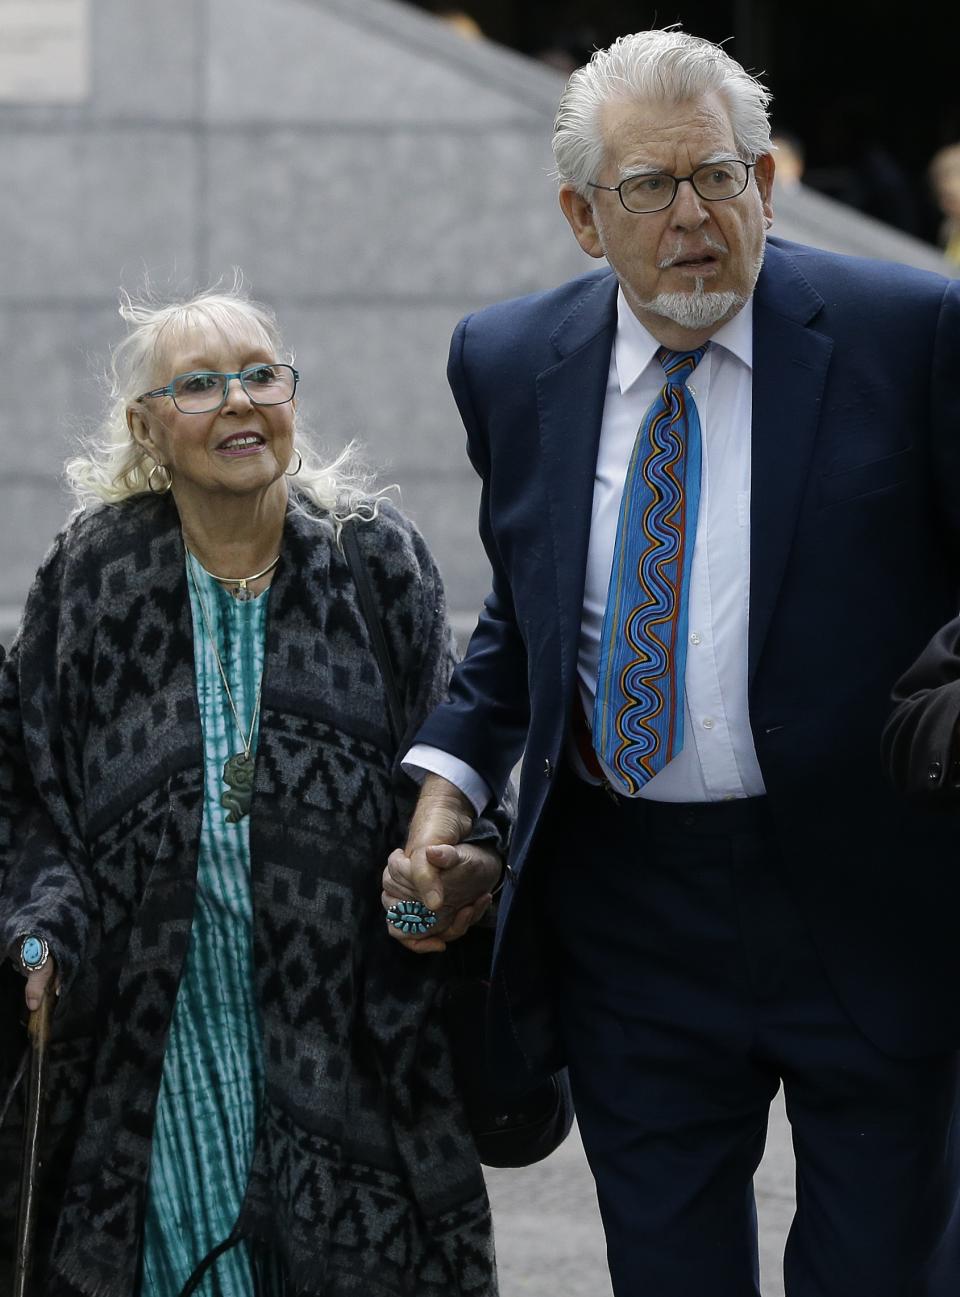 Veteran entertainer Rolf Harris arrives with his wife Alwen Hughes at Southwark Crown Court in London, Tuesday, May 6, 2014. Harris is charged with nine counts of indecent assault and four counts of making indecent images of children. (AP Photo/Kirsty Wigglesworth)